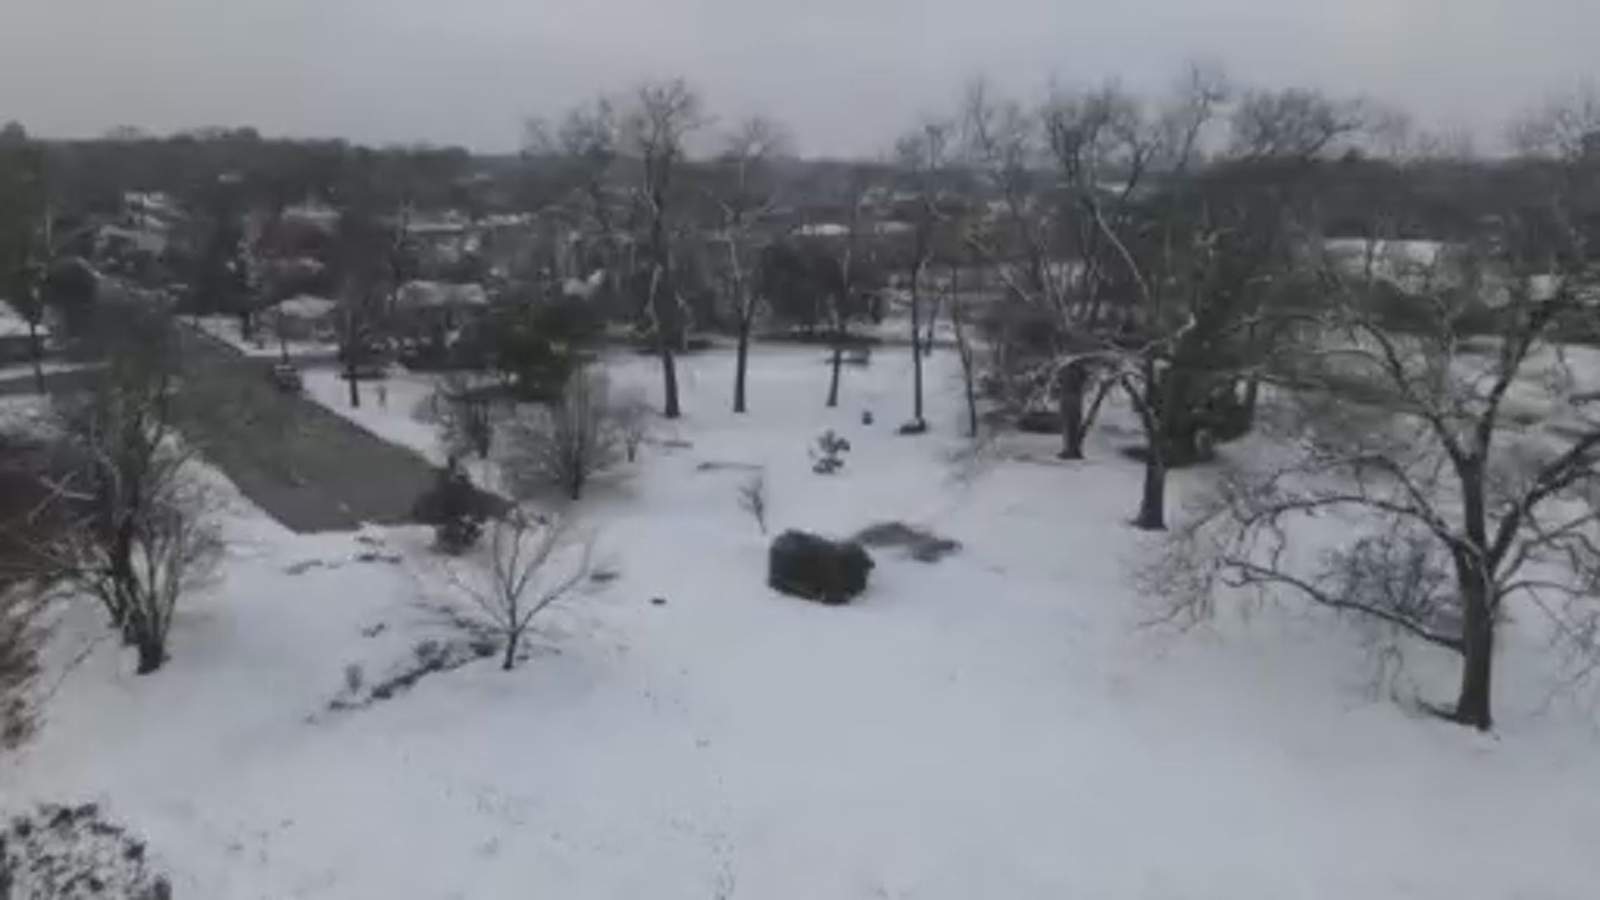 Snow day in Texas: Huntsville residents wake up to landscape dressed in white